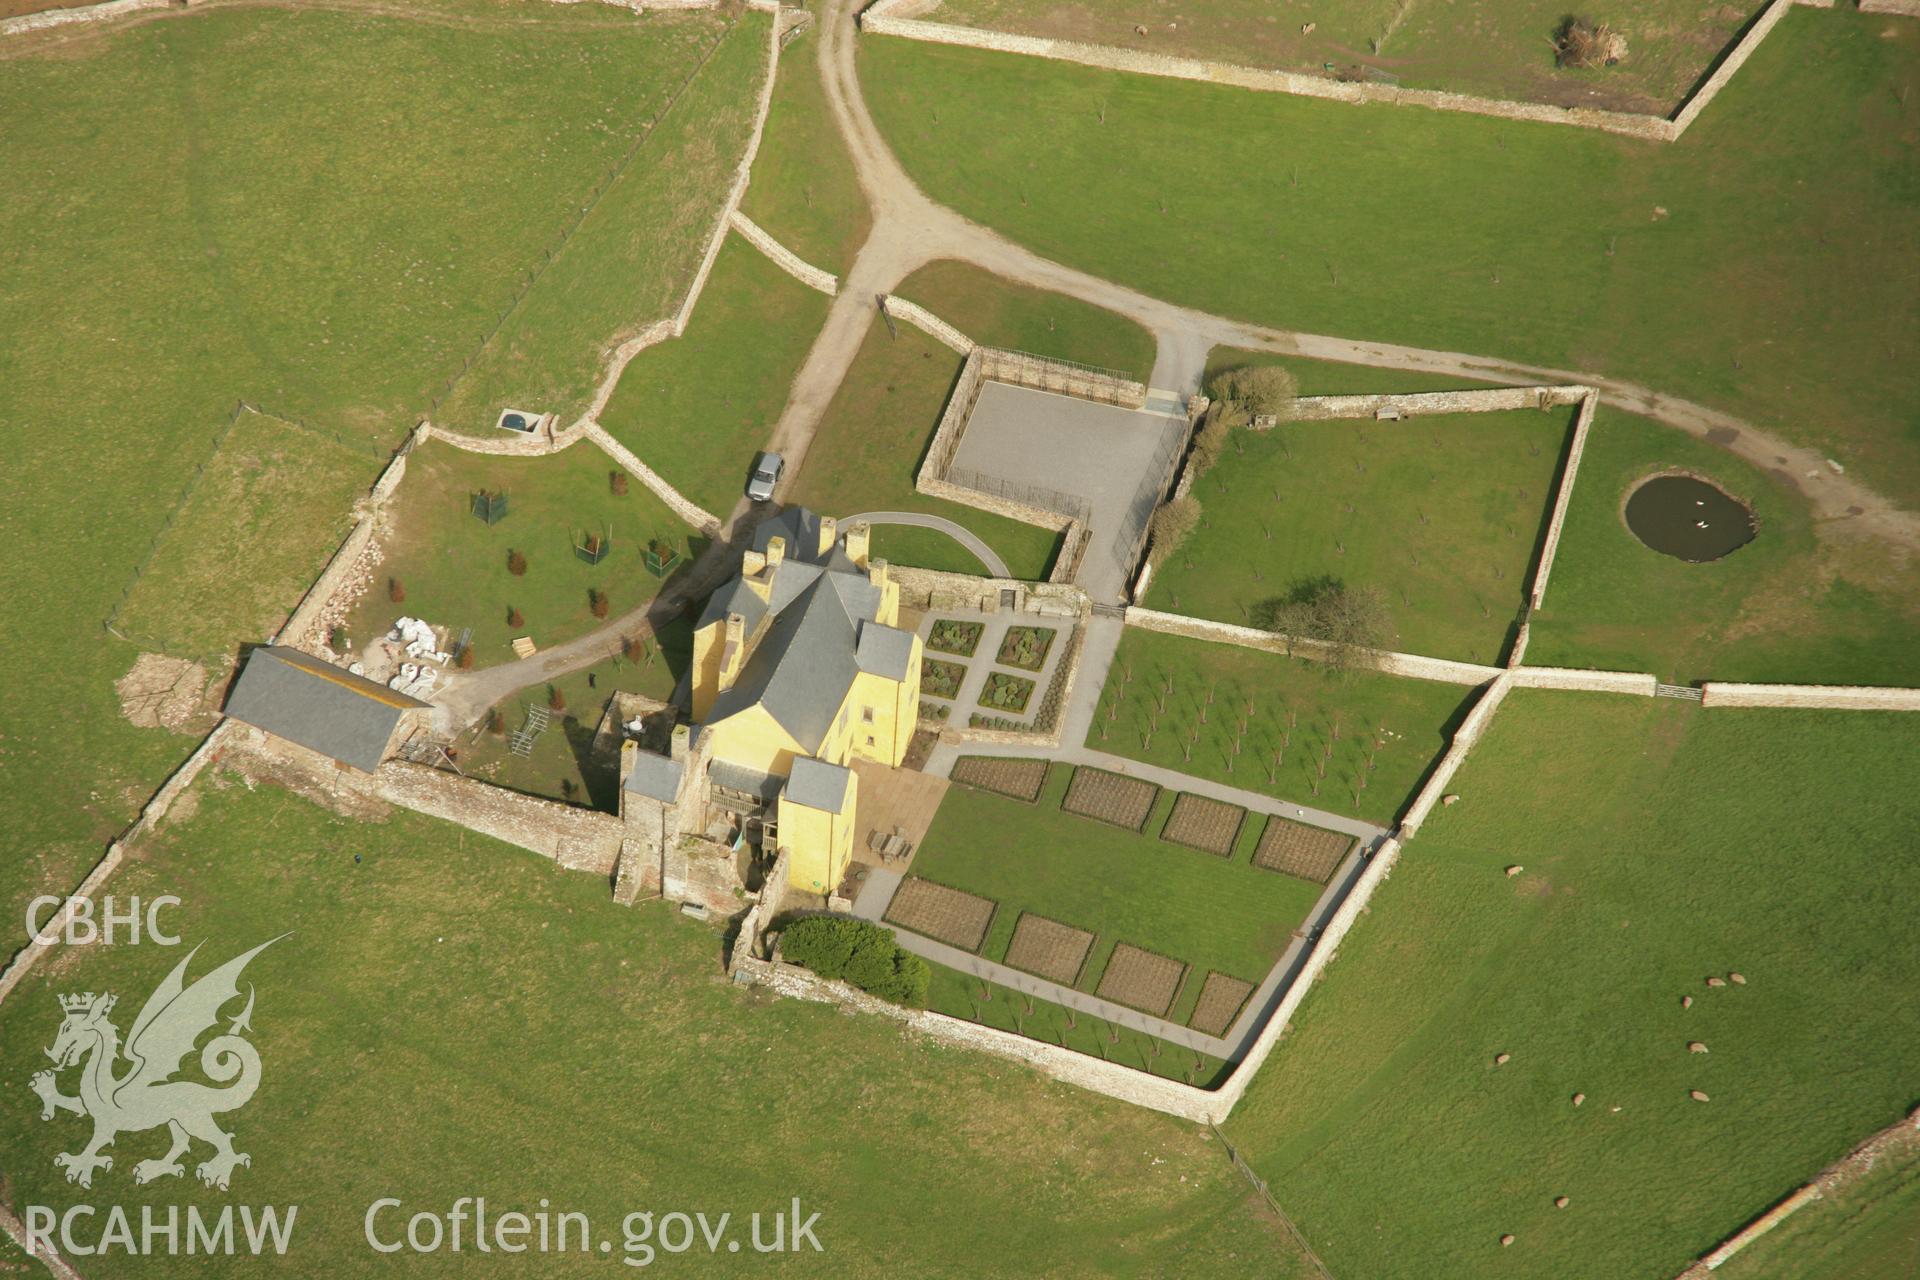 RCAHMW colour oblique aerial photograph of Sker House. Taken on 16 March 2007 by Toby Driver